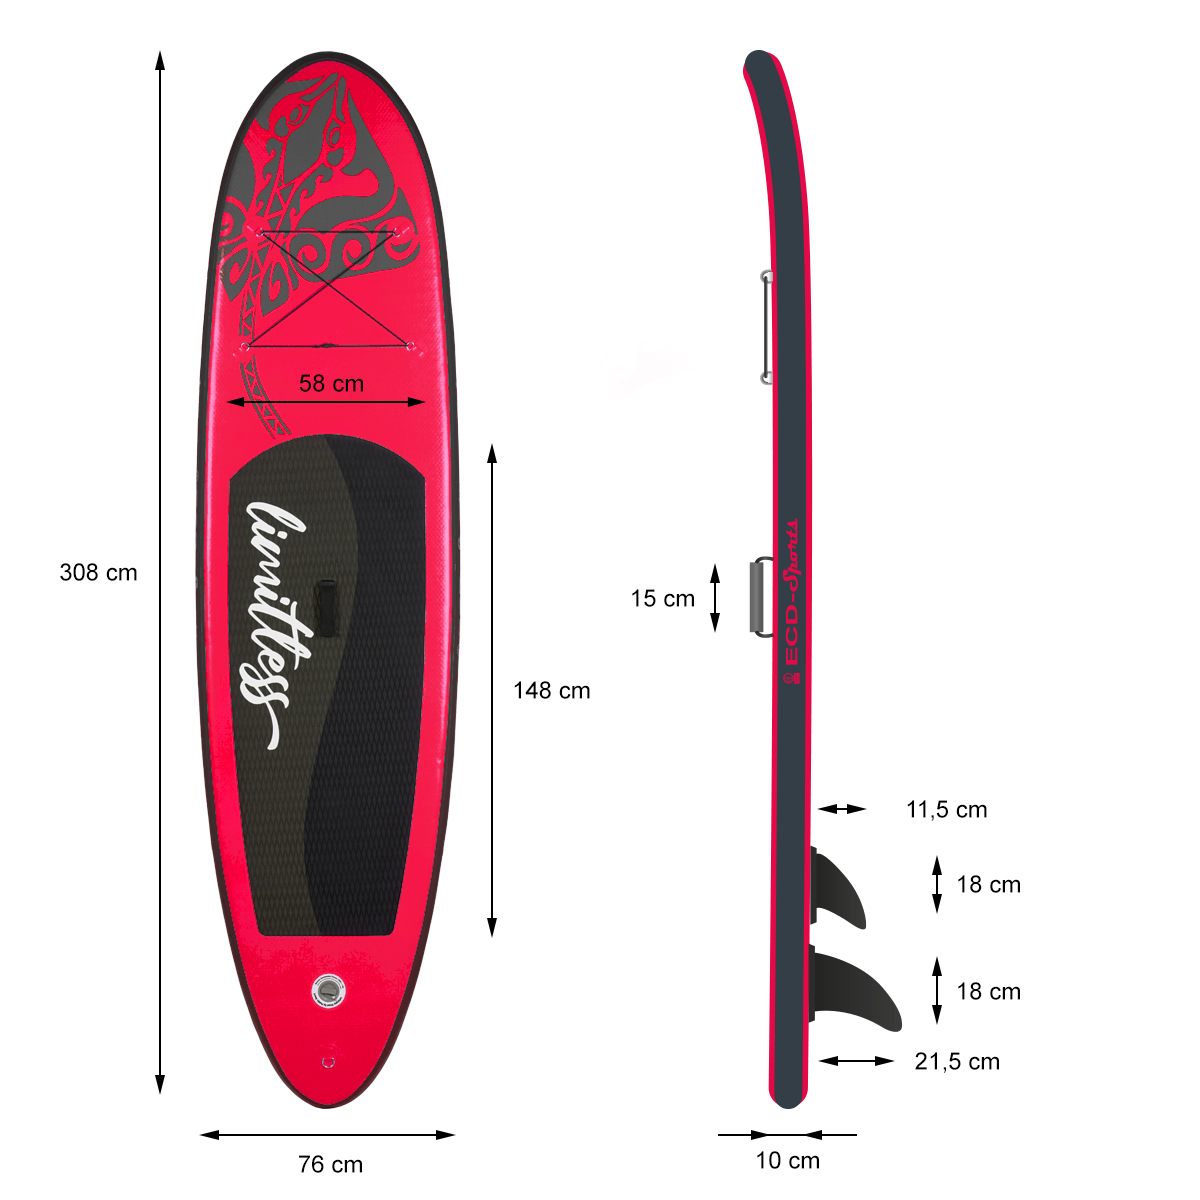 ECD-GERMANY Aufblasbares Stand Up Red Up Stand Board Paddle, Paddle